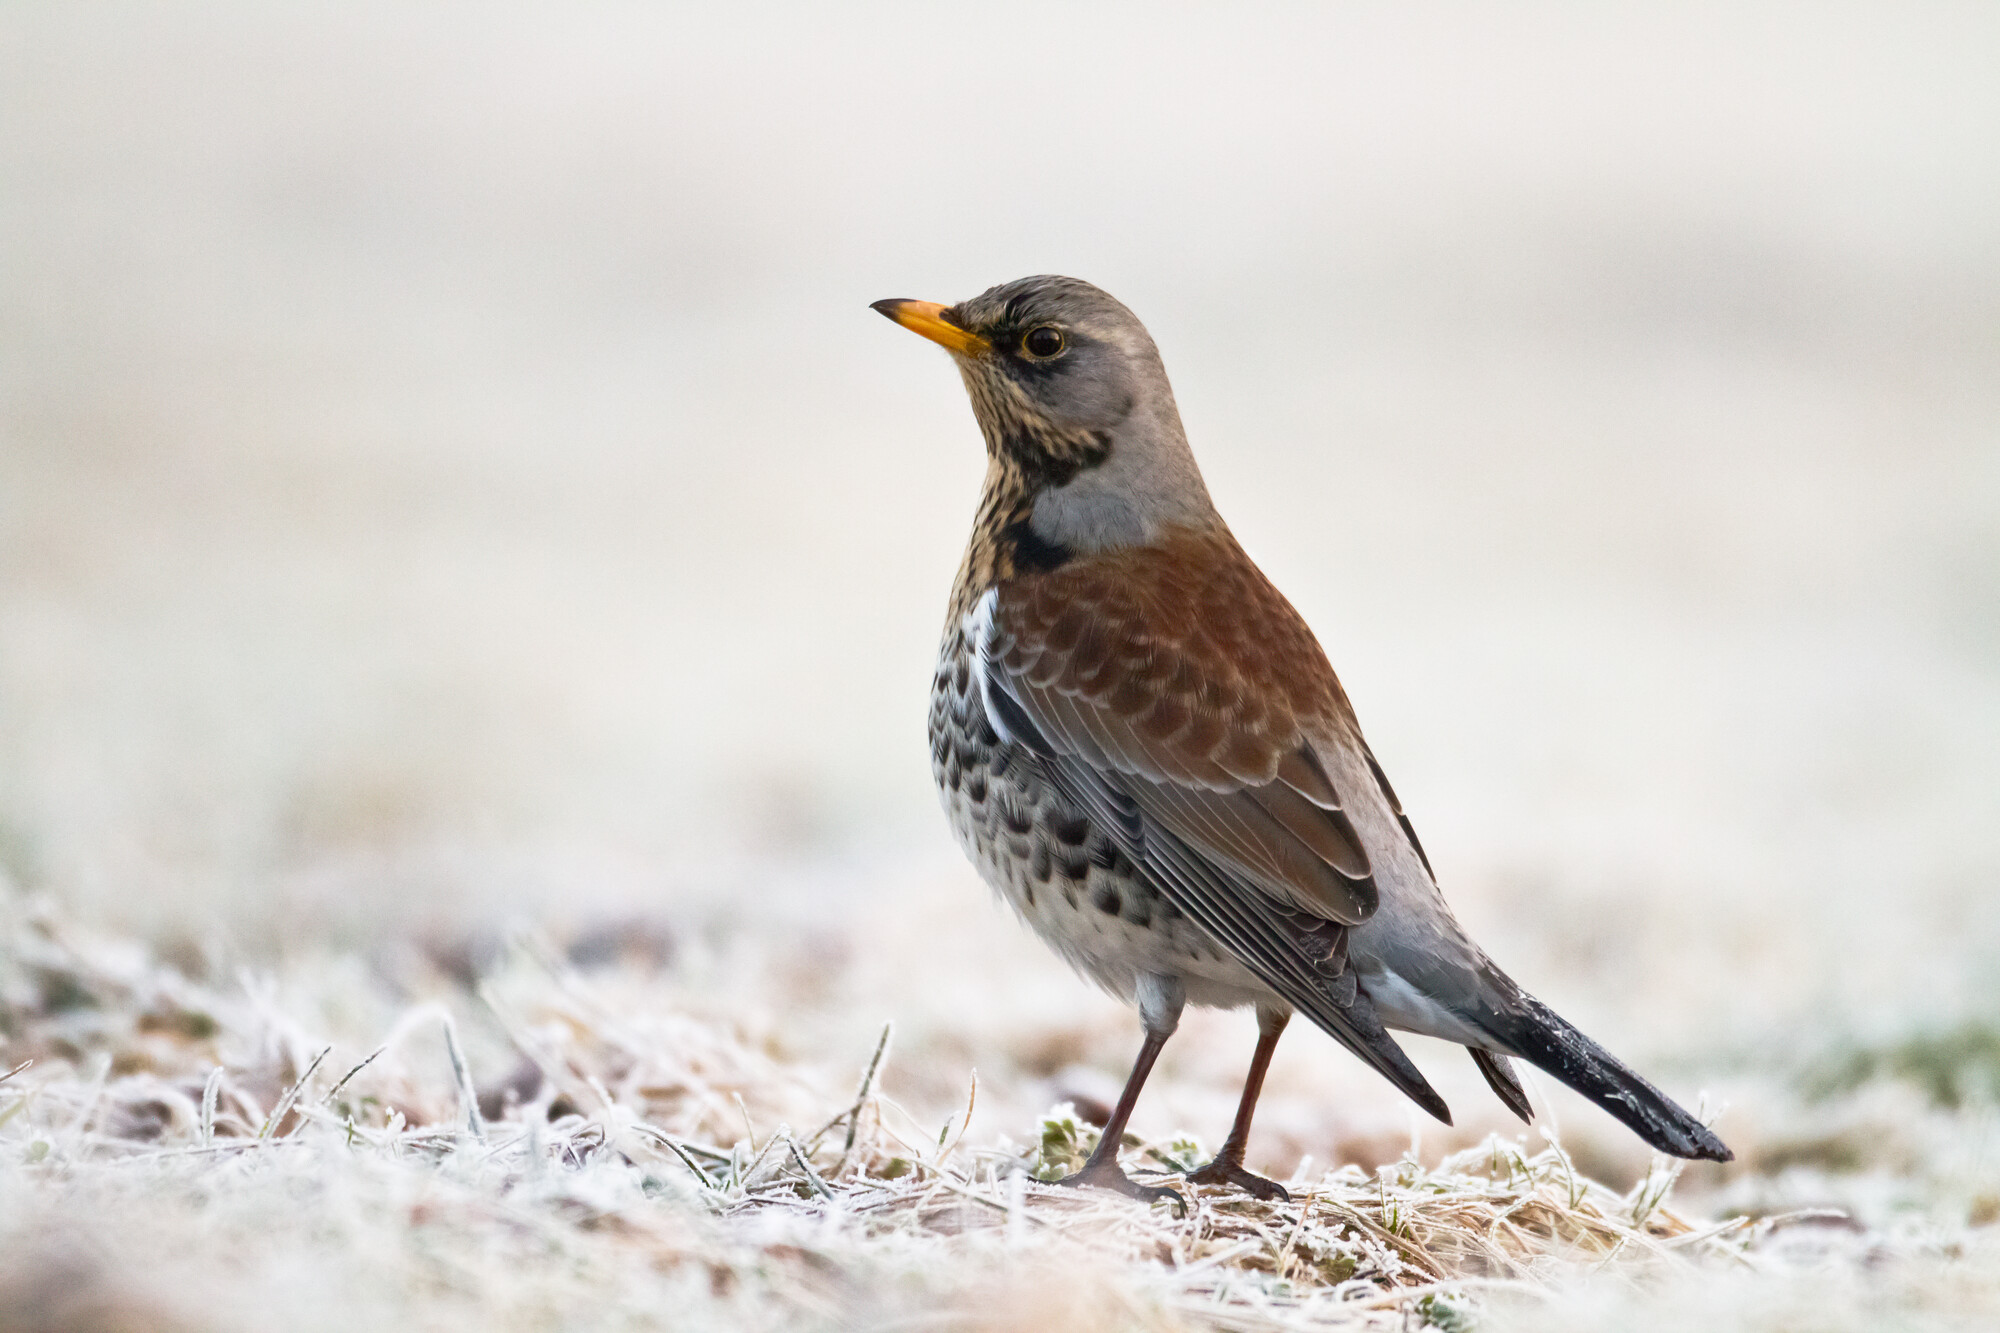 Fieldfare bird resting on frost-covered ground.